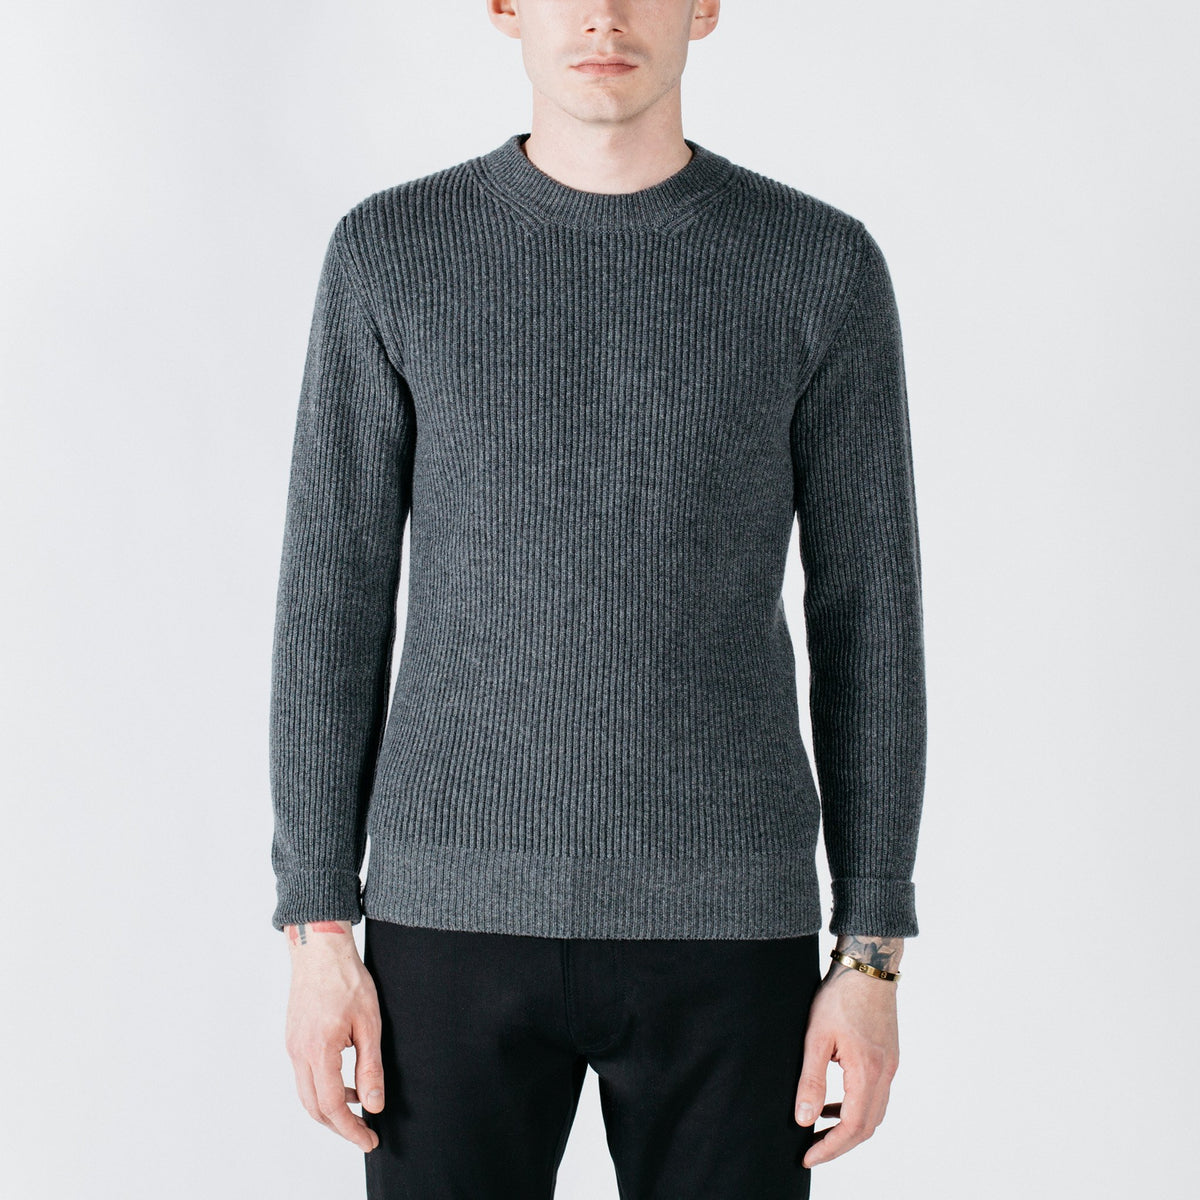 Smuggler Cashmere Crew Sweater - Darby Grey knitwear Commonwealth Proper